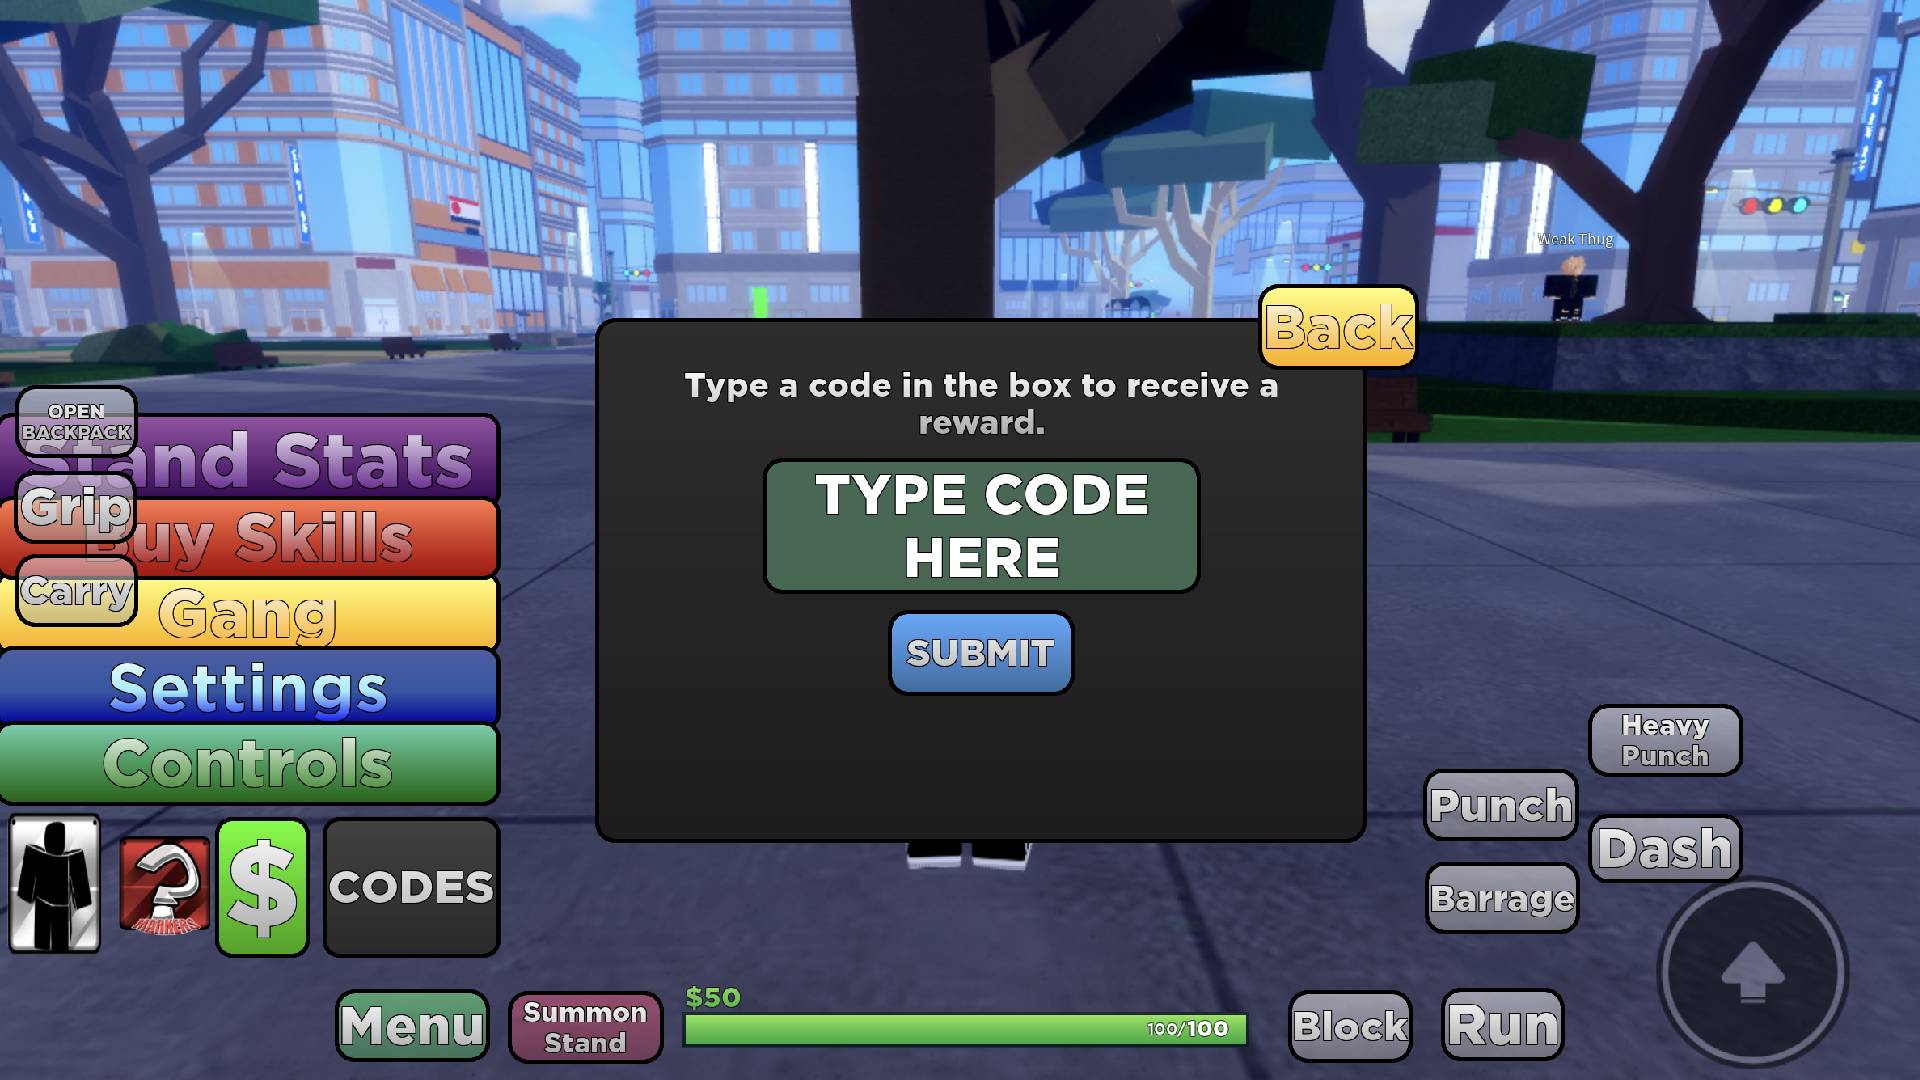 Unequal codes (December 2022) - Free cash and XP boosts